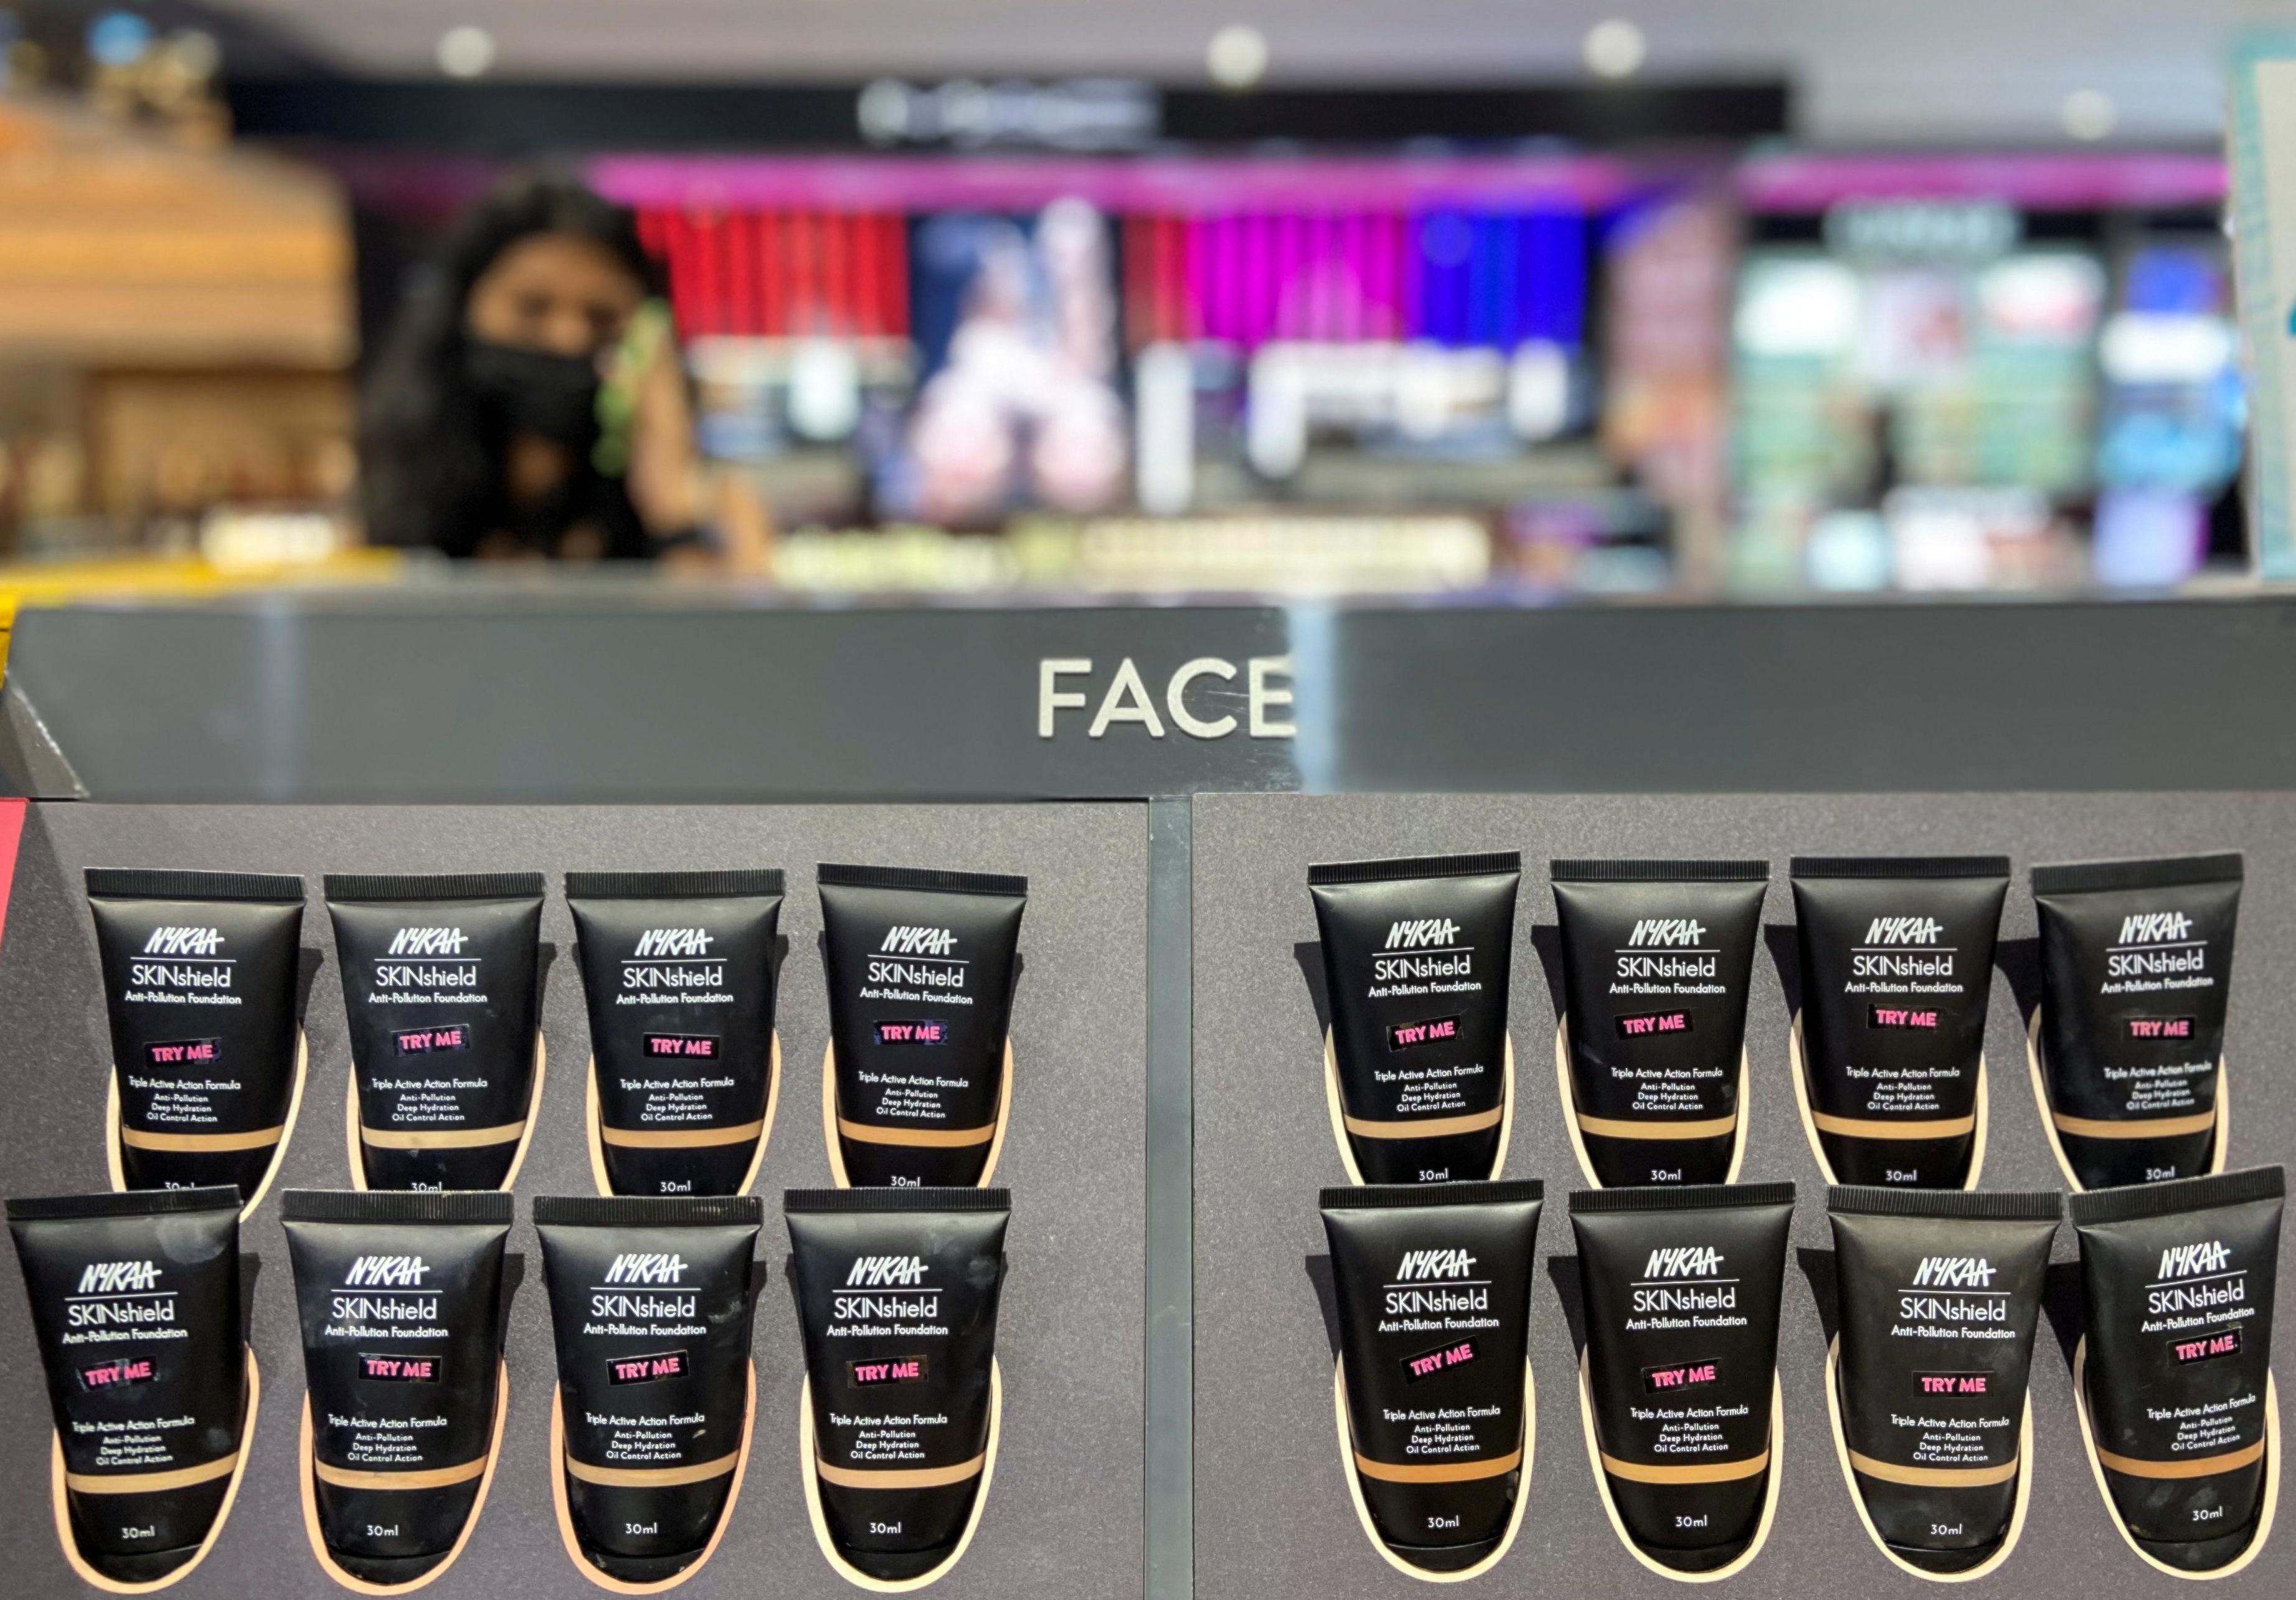 Beauty products by Nykaa, an Indian beauty products retailer, are seen for sale in a store at a mall in New Delhi